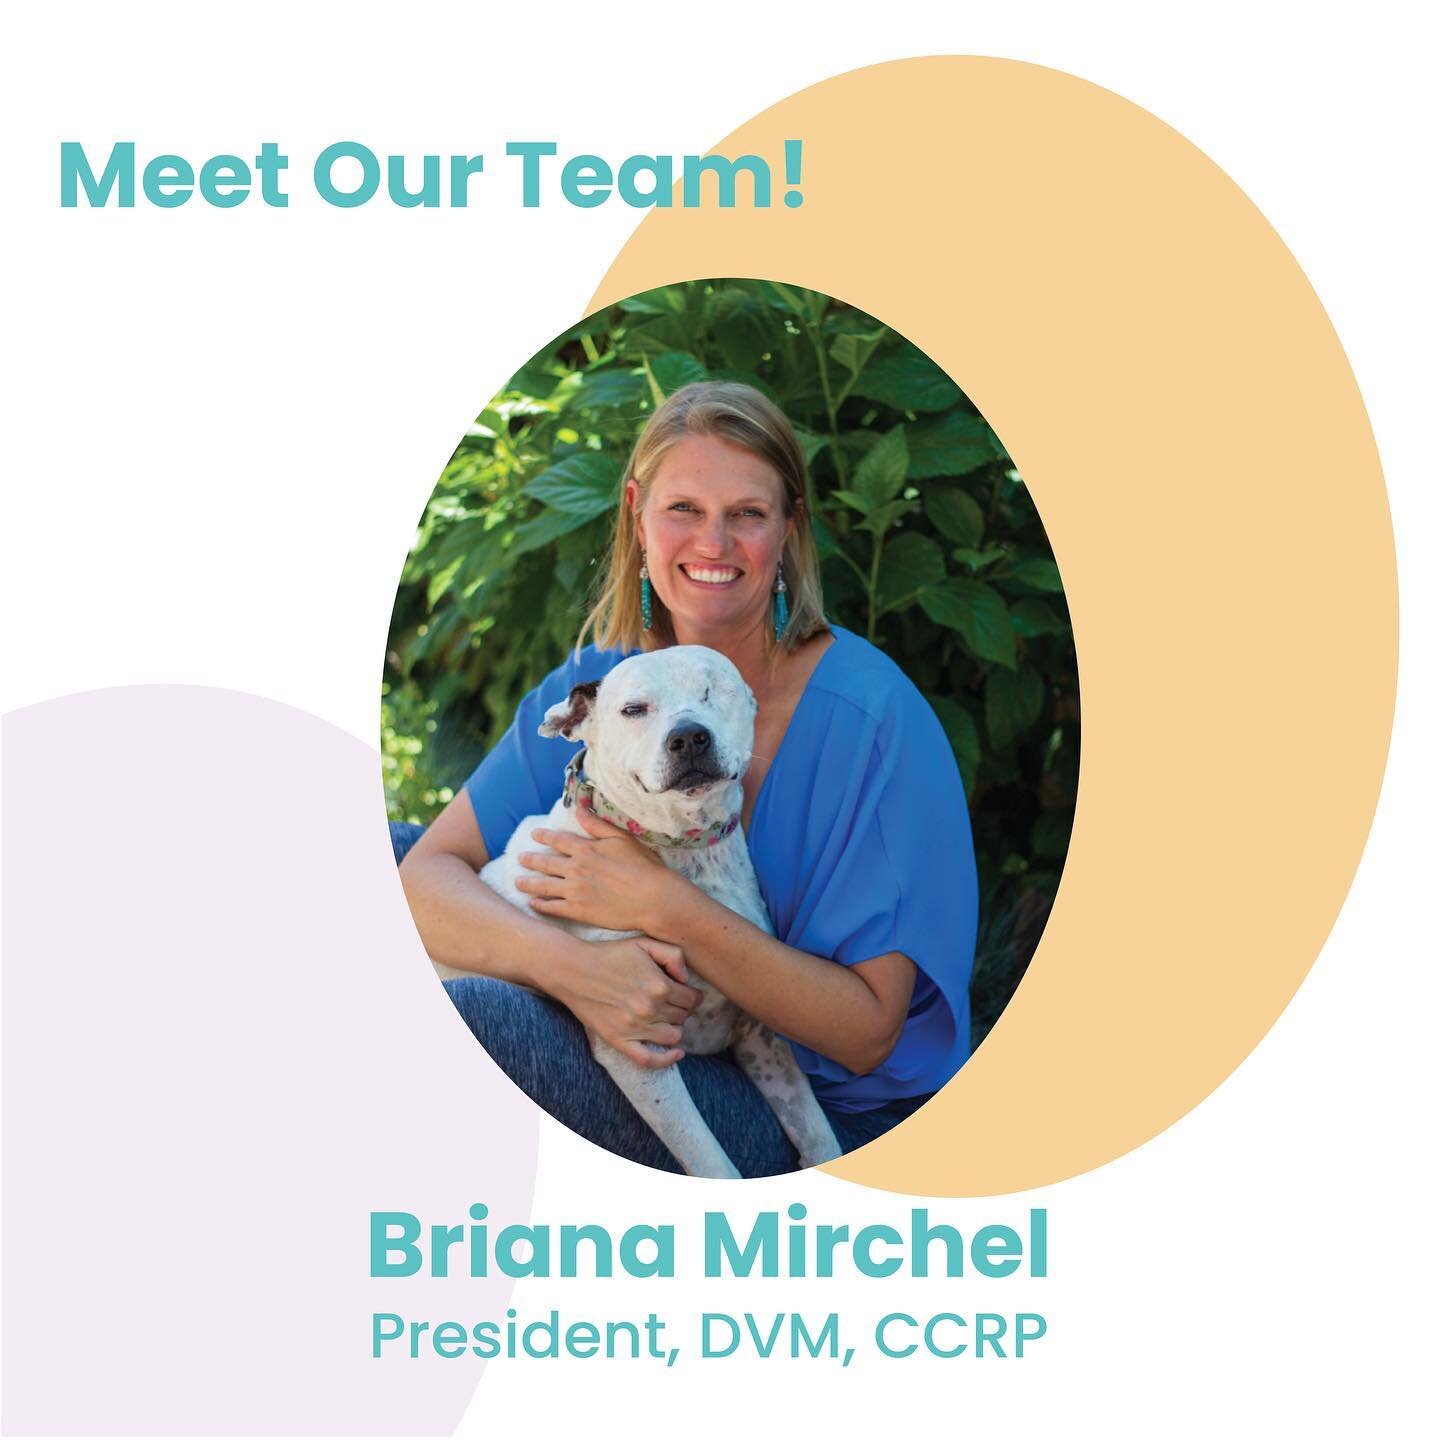 Growing up with a menagerie, Briana is grateful to have been around animals her whole life. As a veterinarian, Briana came to know many seniors whose pets had a profoundly positive impact on their lives, including her own grandparents, who rescued a 